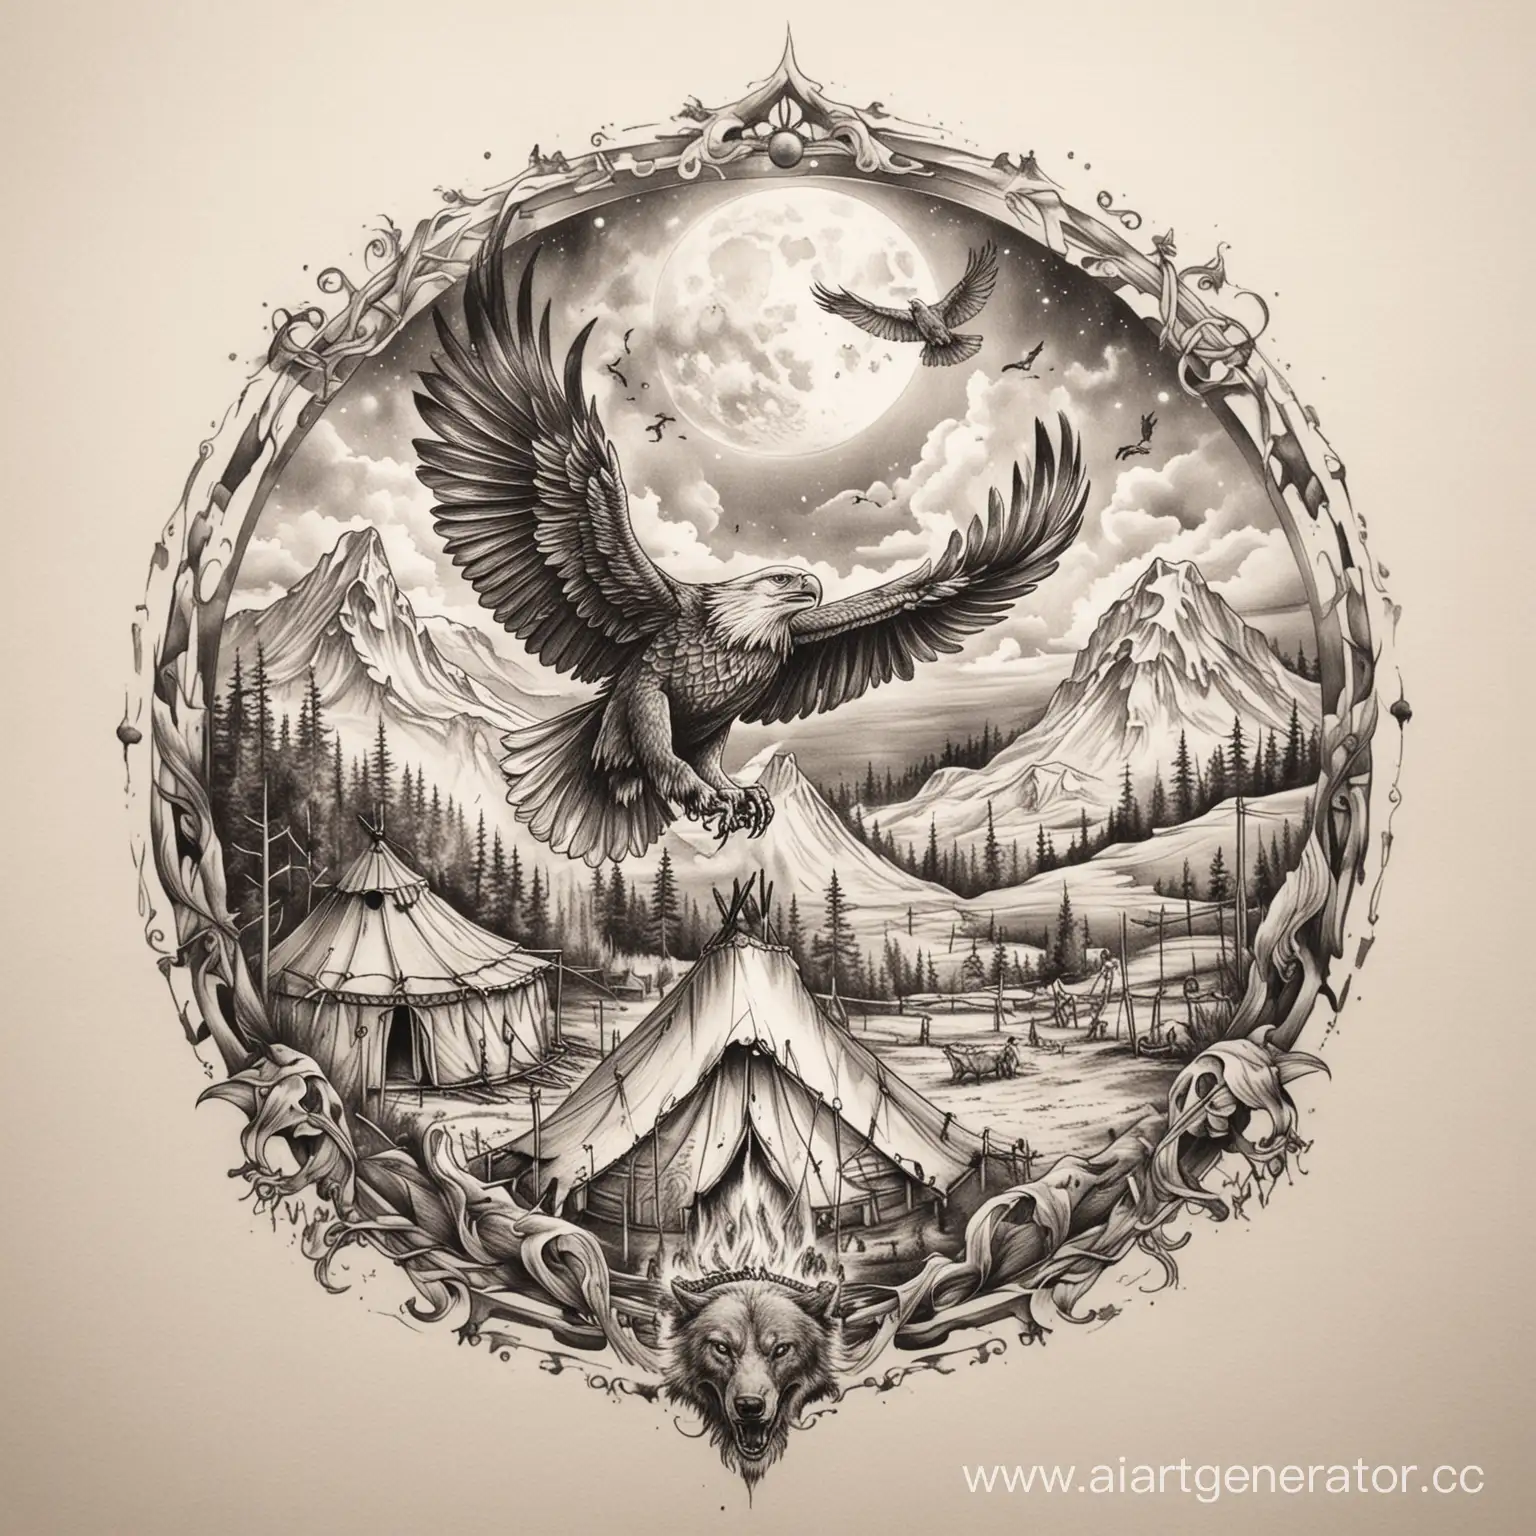 Eagle-Tattoo-Design-with-Yurt-Galloping-Horses-and-Moonlit-Wolf-Snarl